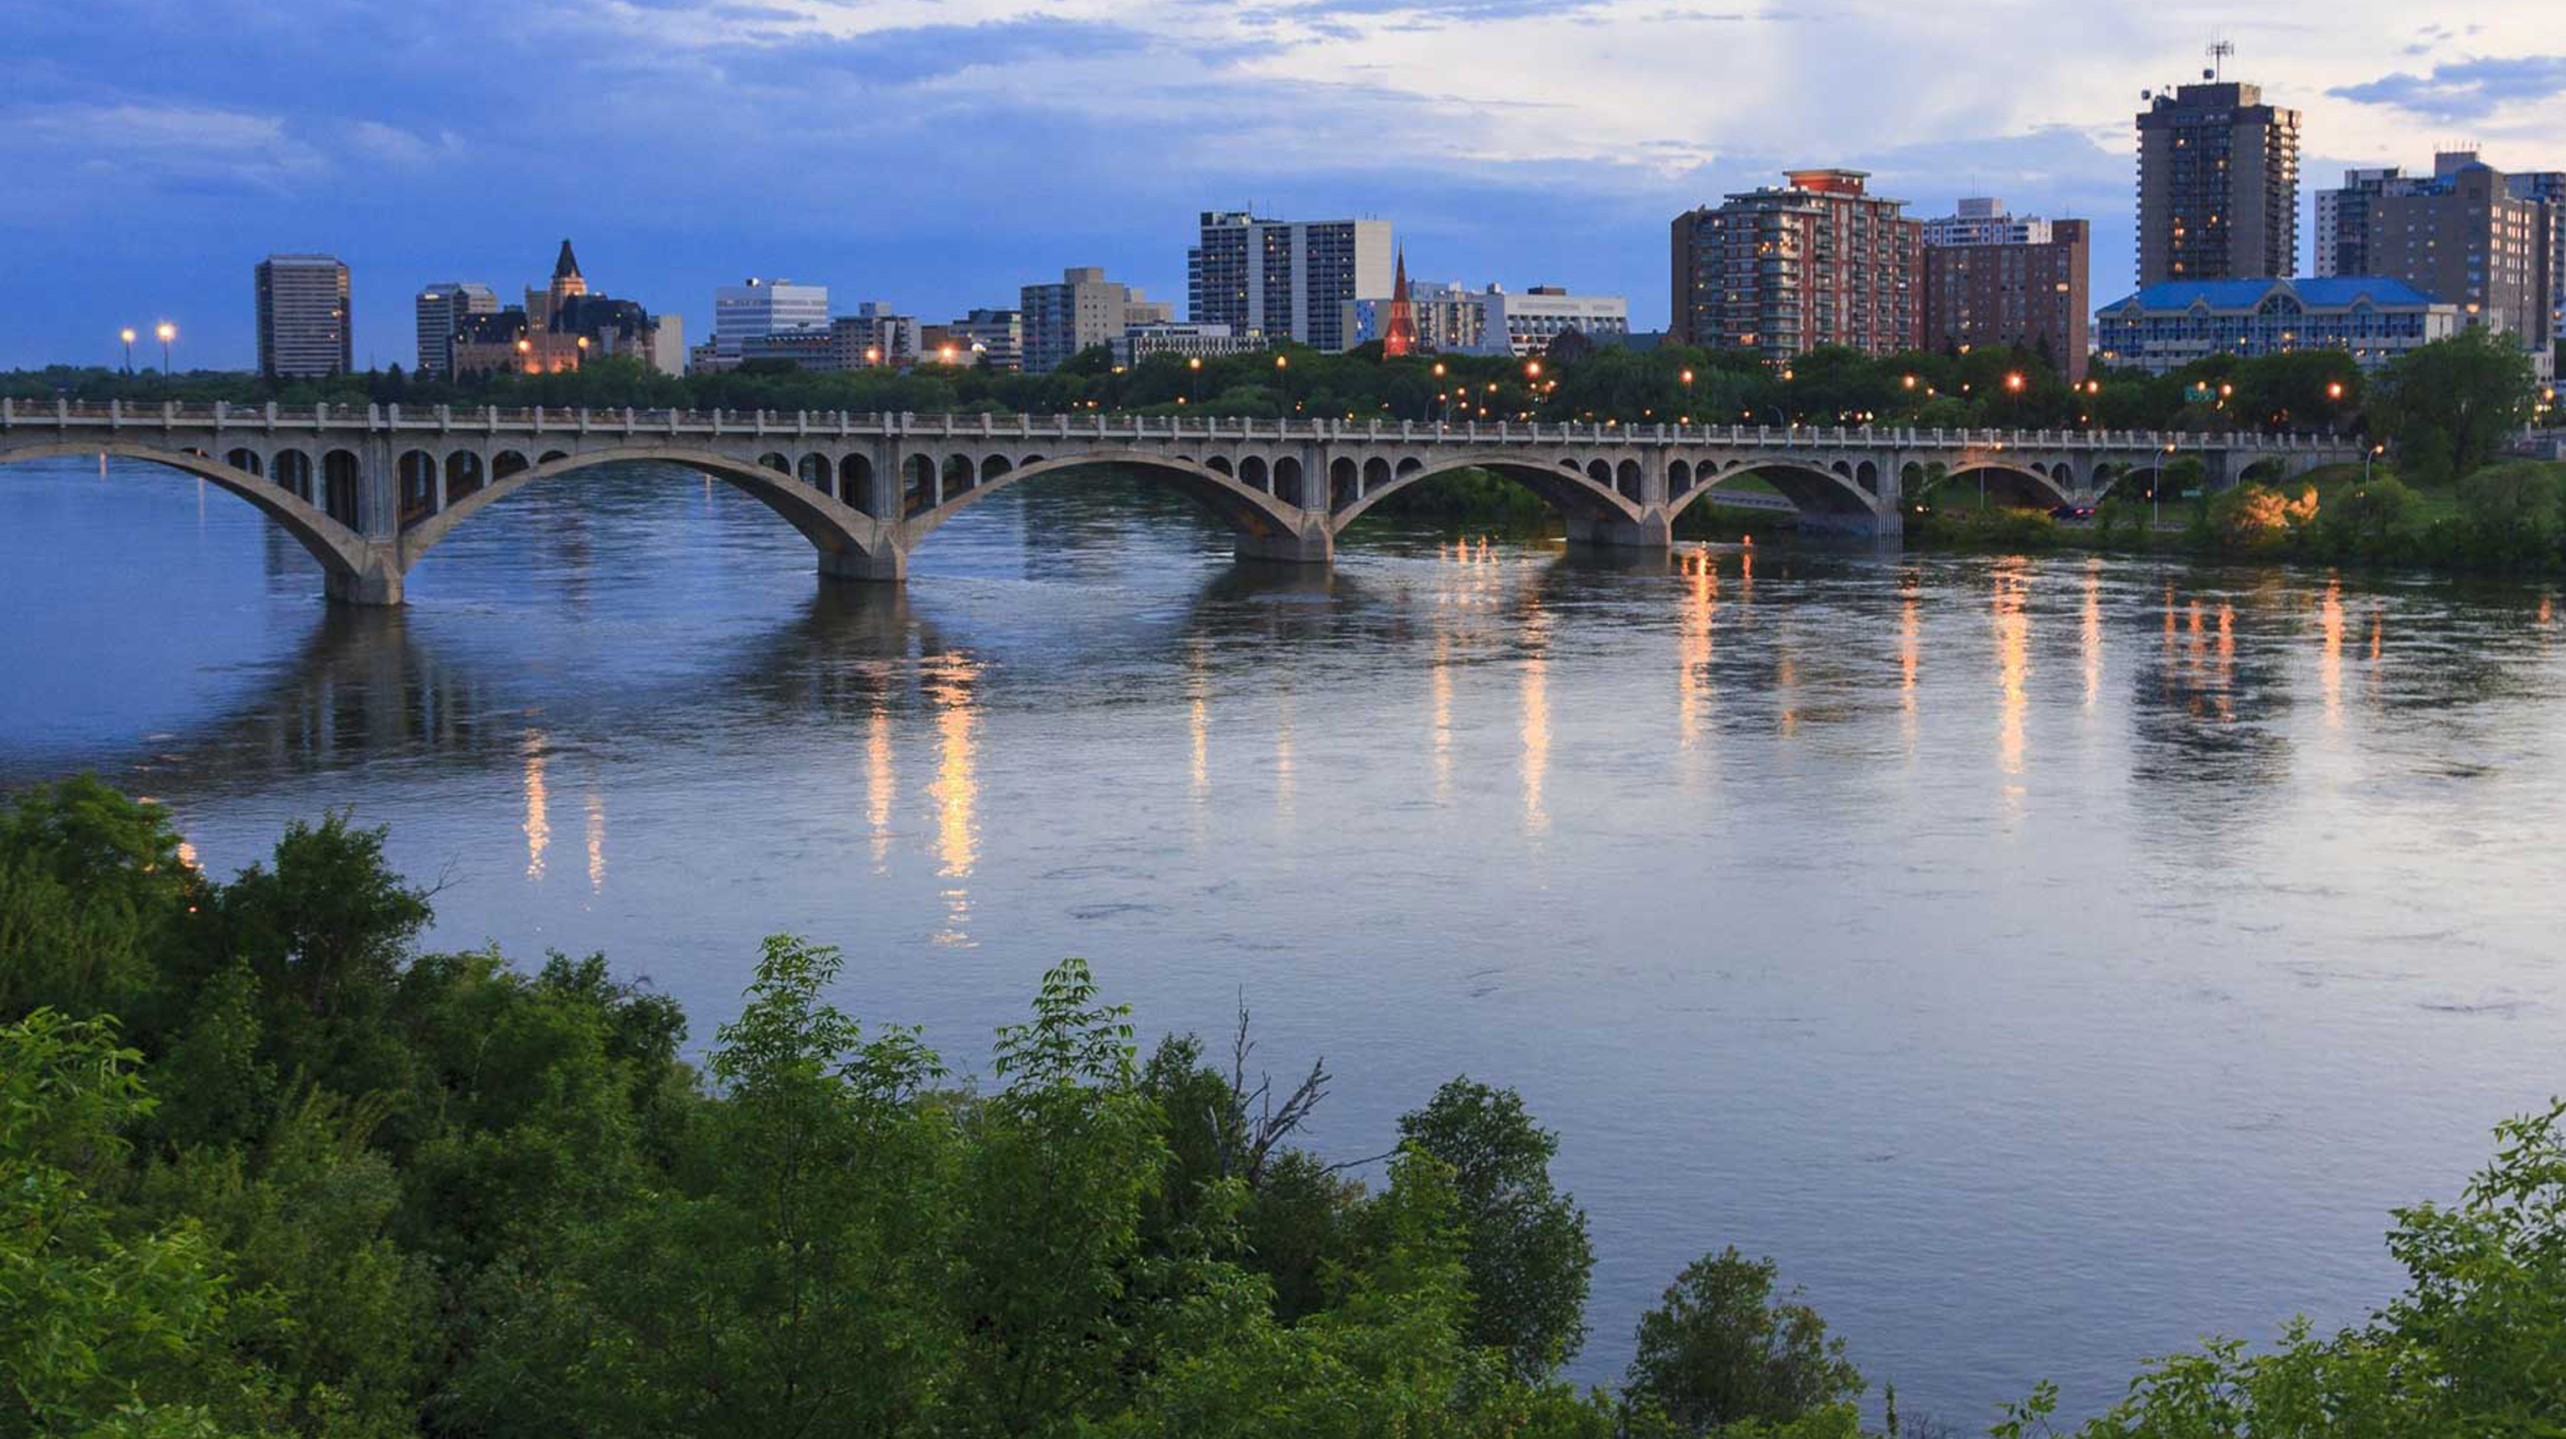 WHAT MAKES SASKATOON ONE OF THE MOST ROMANTIC CITIES IN CANADA?